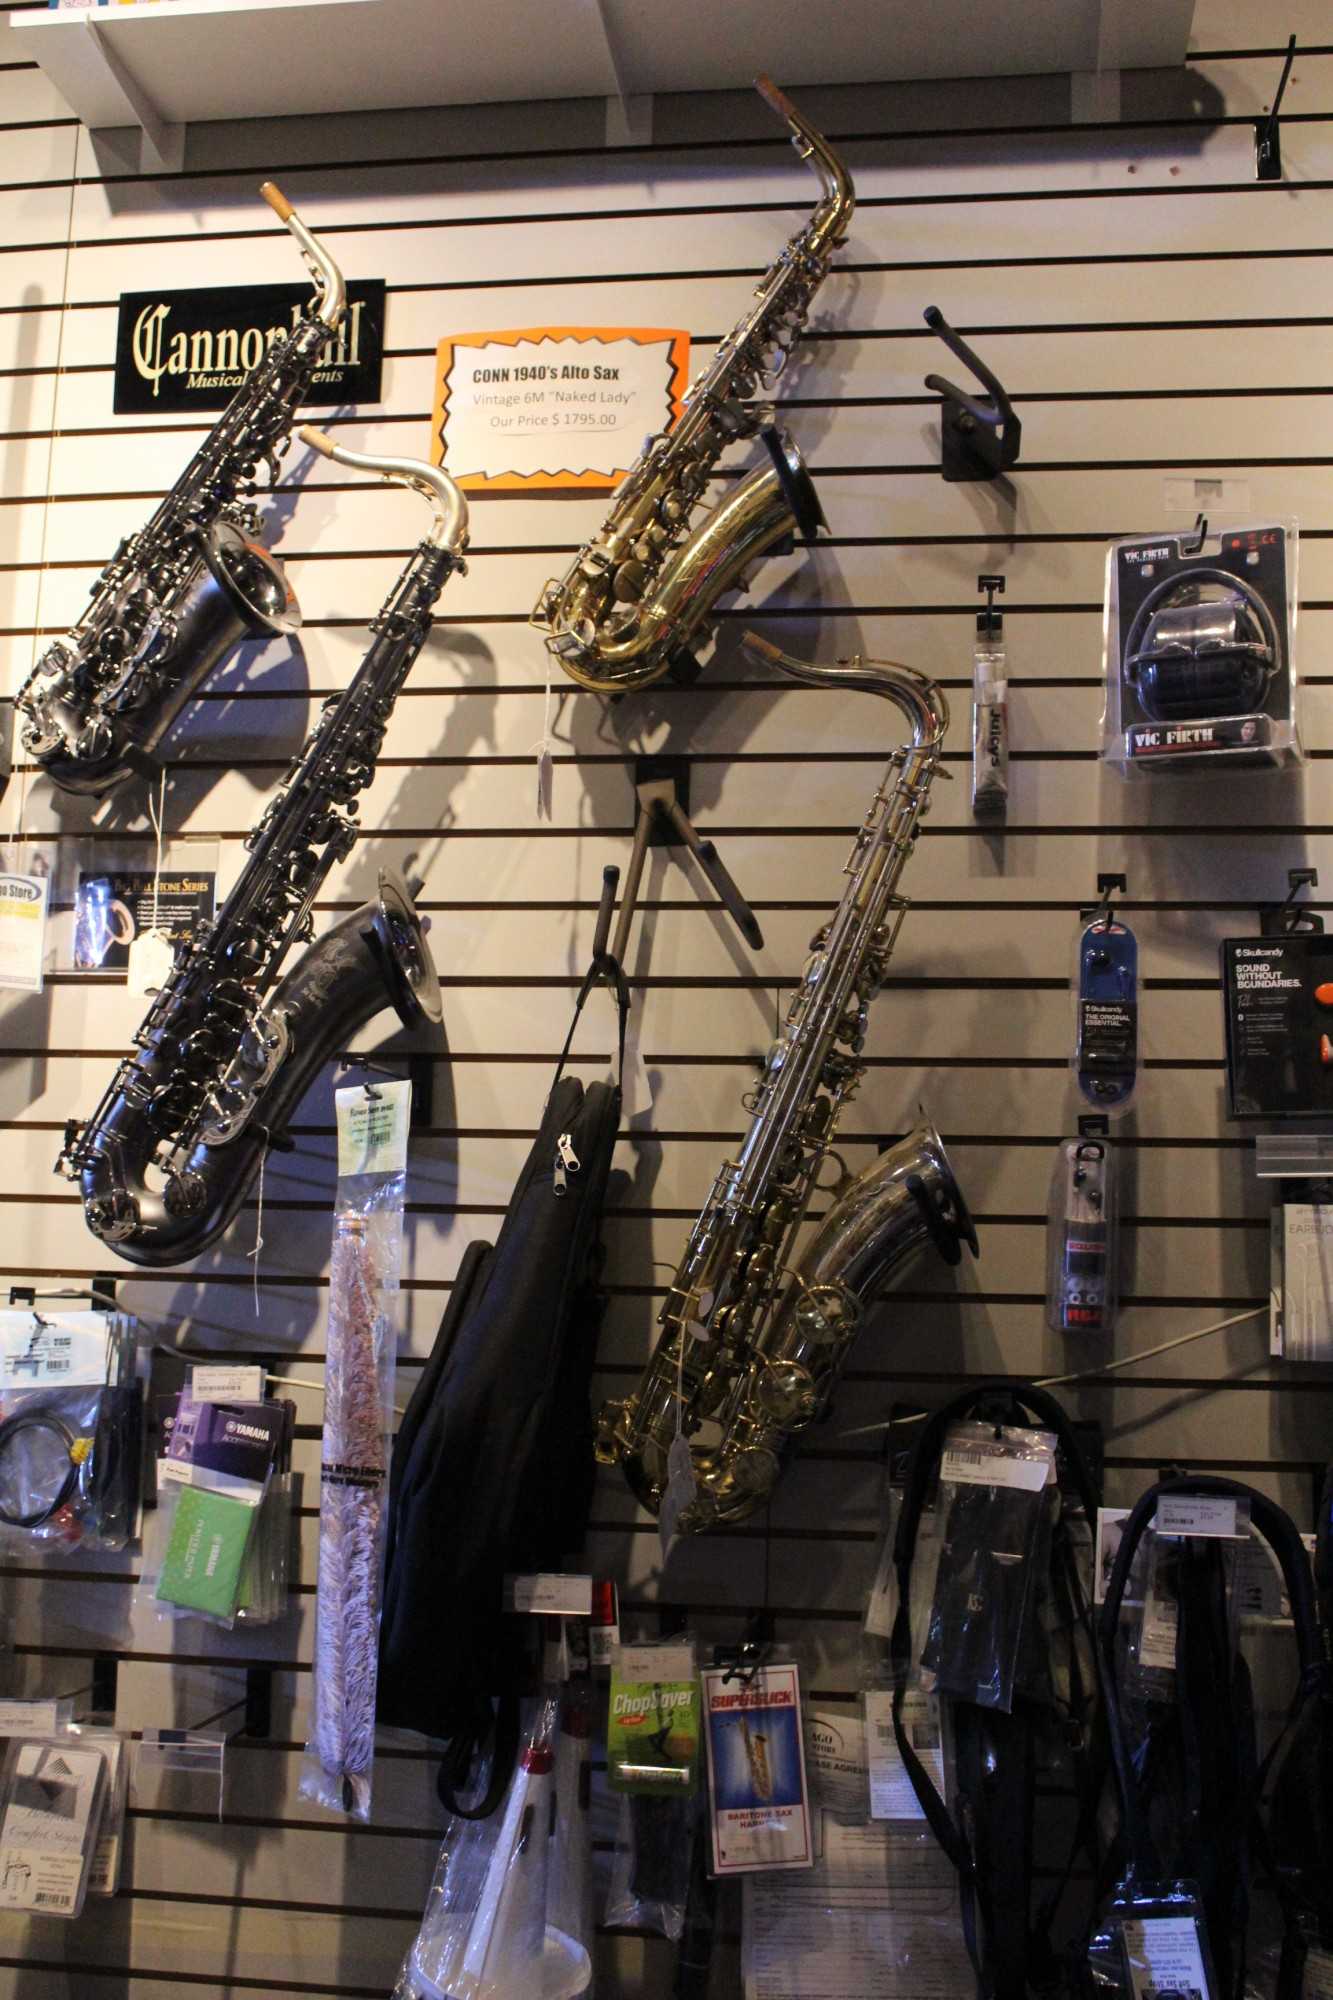 Conn 1940's Alto Sax as well as other saxophones on display.